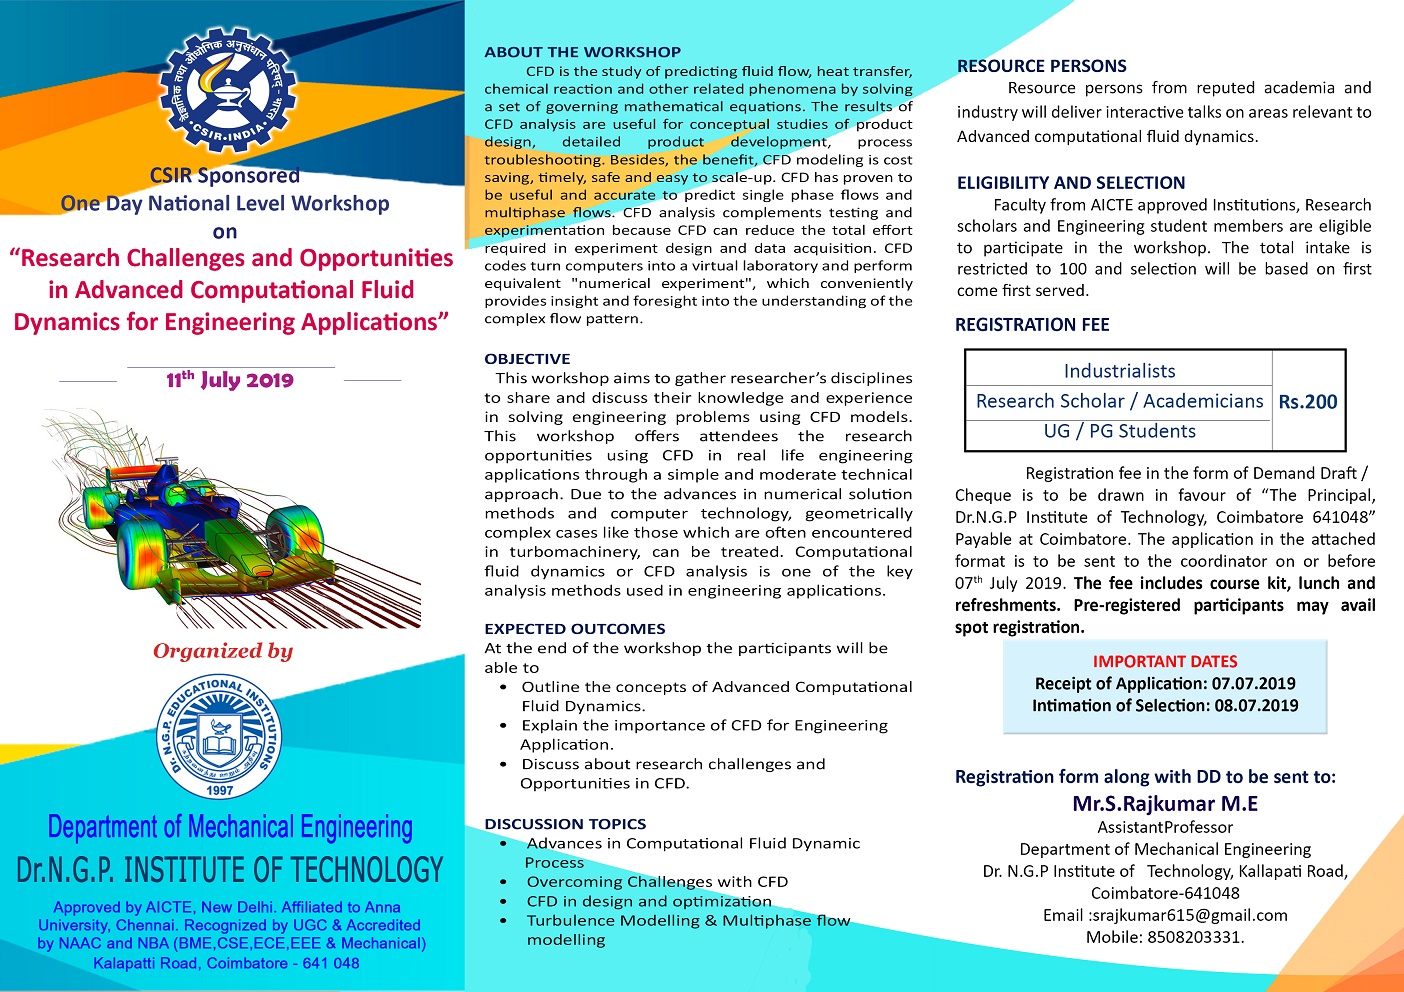 One Day National Level Workshop on Research Challenges and Opportunities in Advanced Computational Fluid Dynamics for Engineering Applications 2019